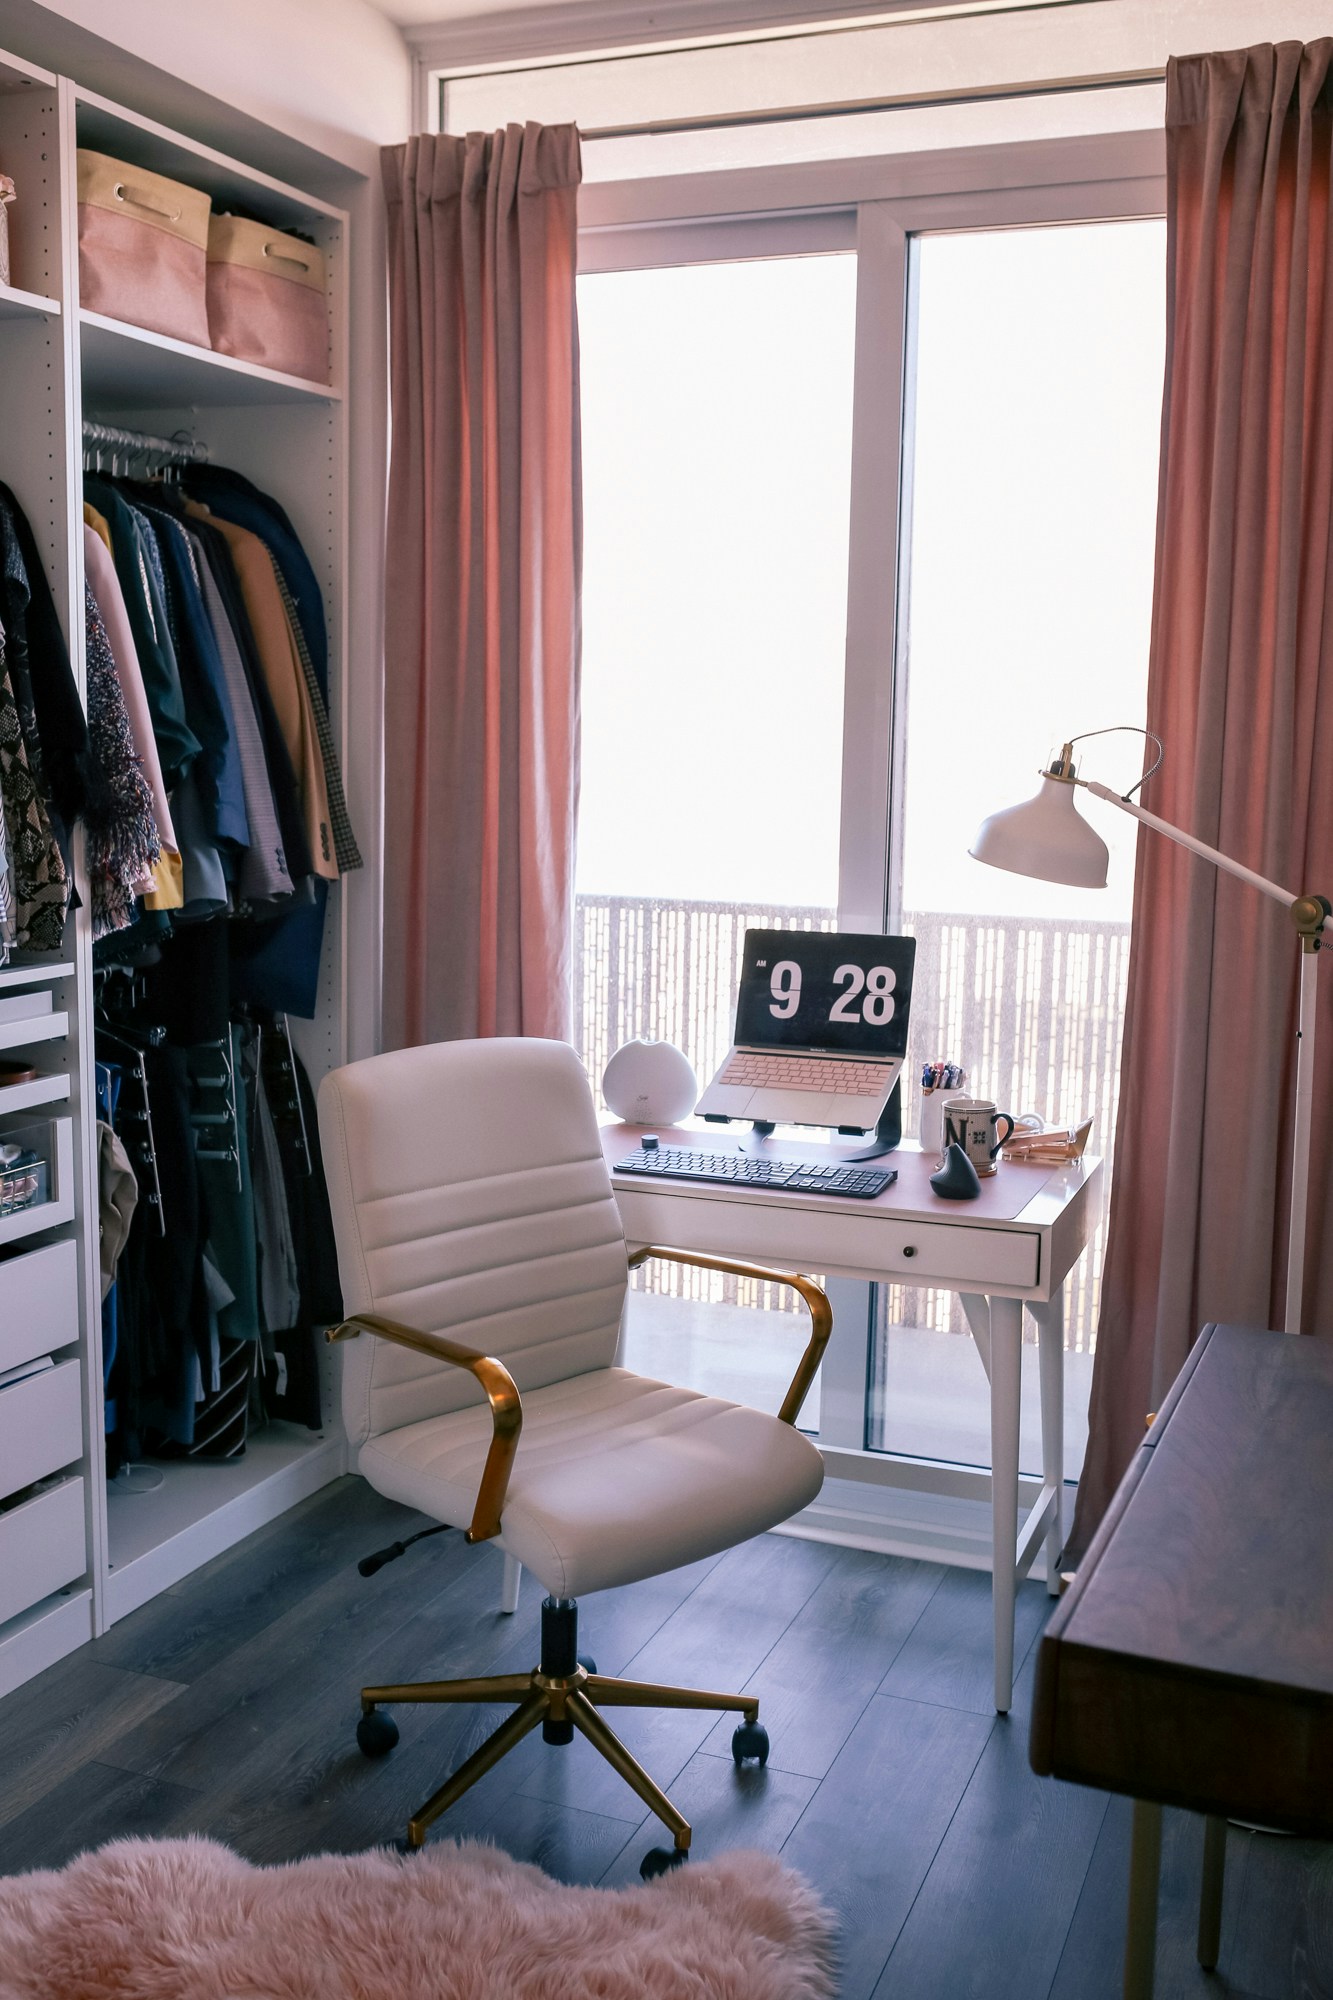 Home Office Decor Tips: Creating a serene space for productivity during self-isolation. West Elm Mid-Century Desk, IKEA Pax wardrobe & a gold desk chair complete the look.